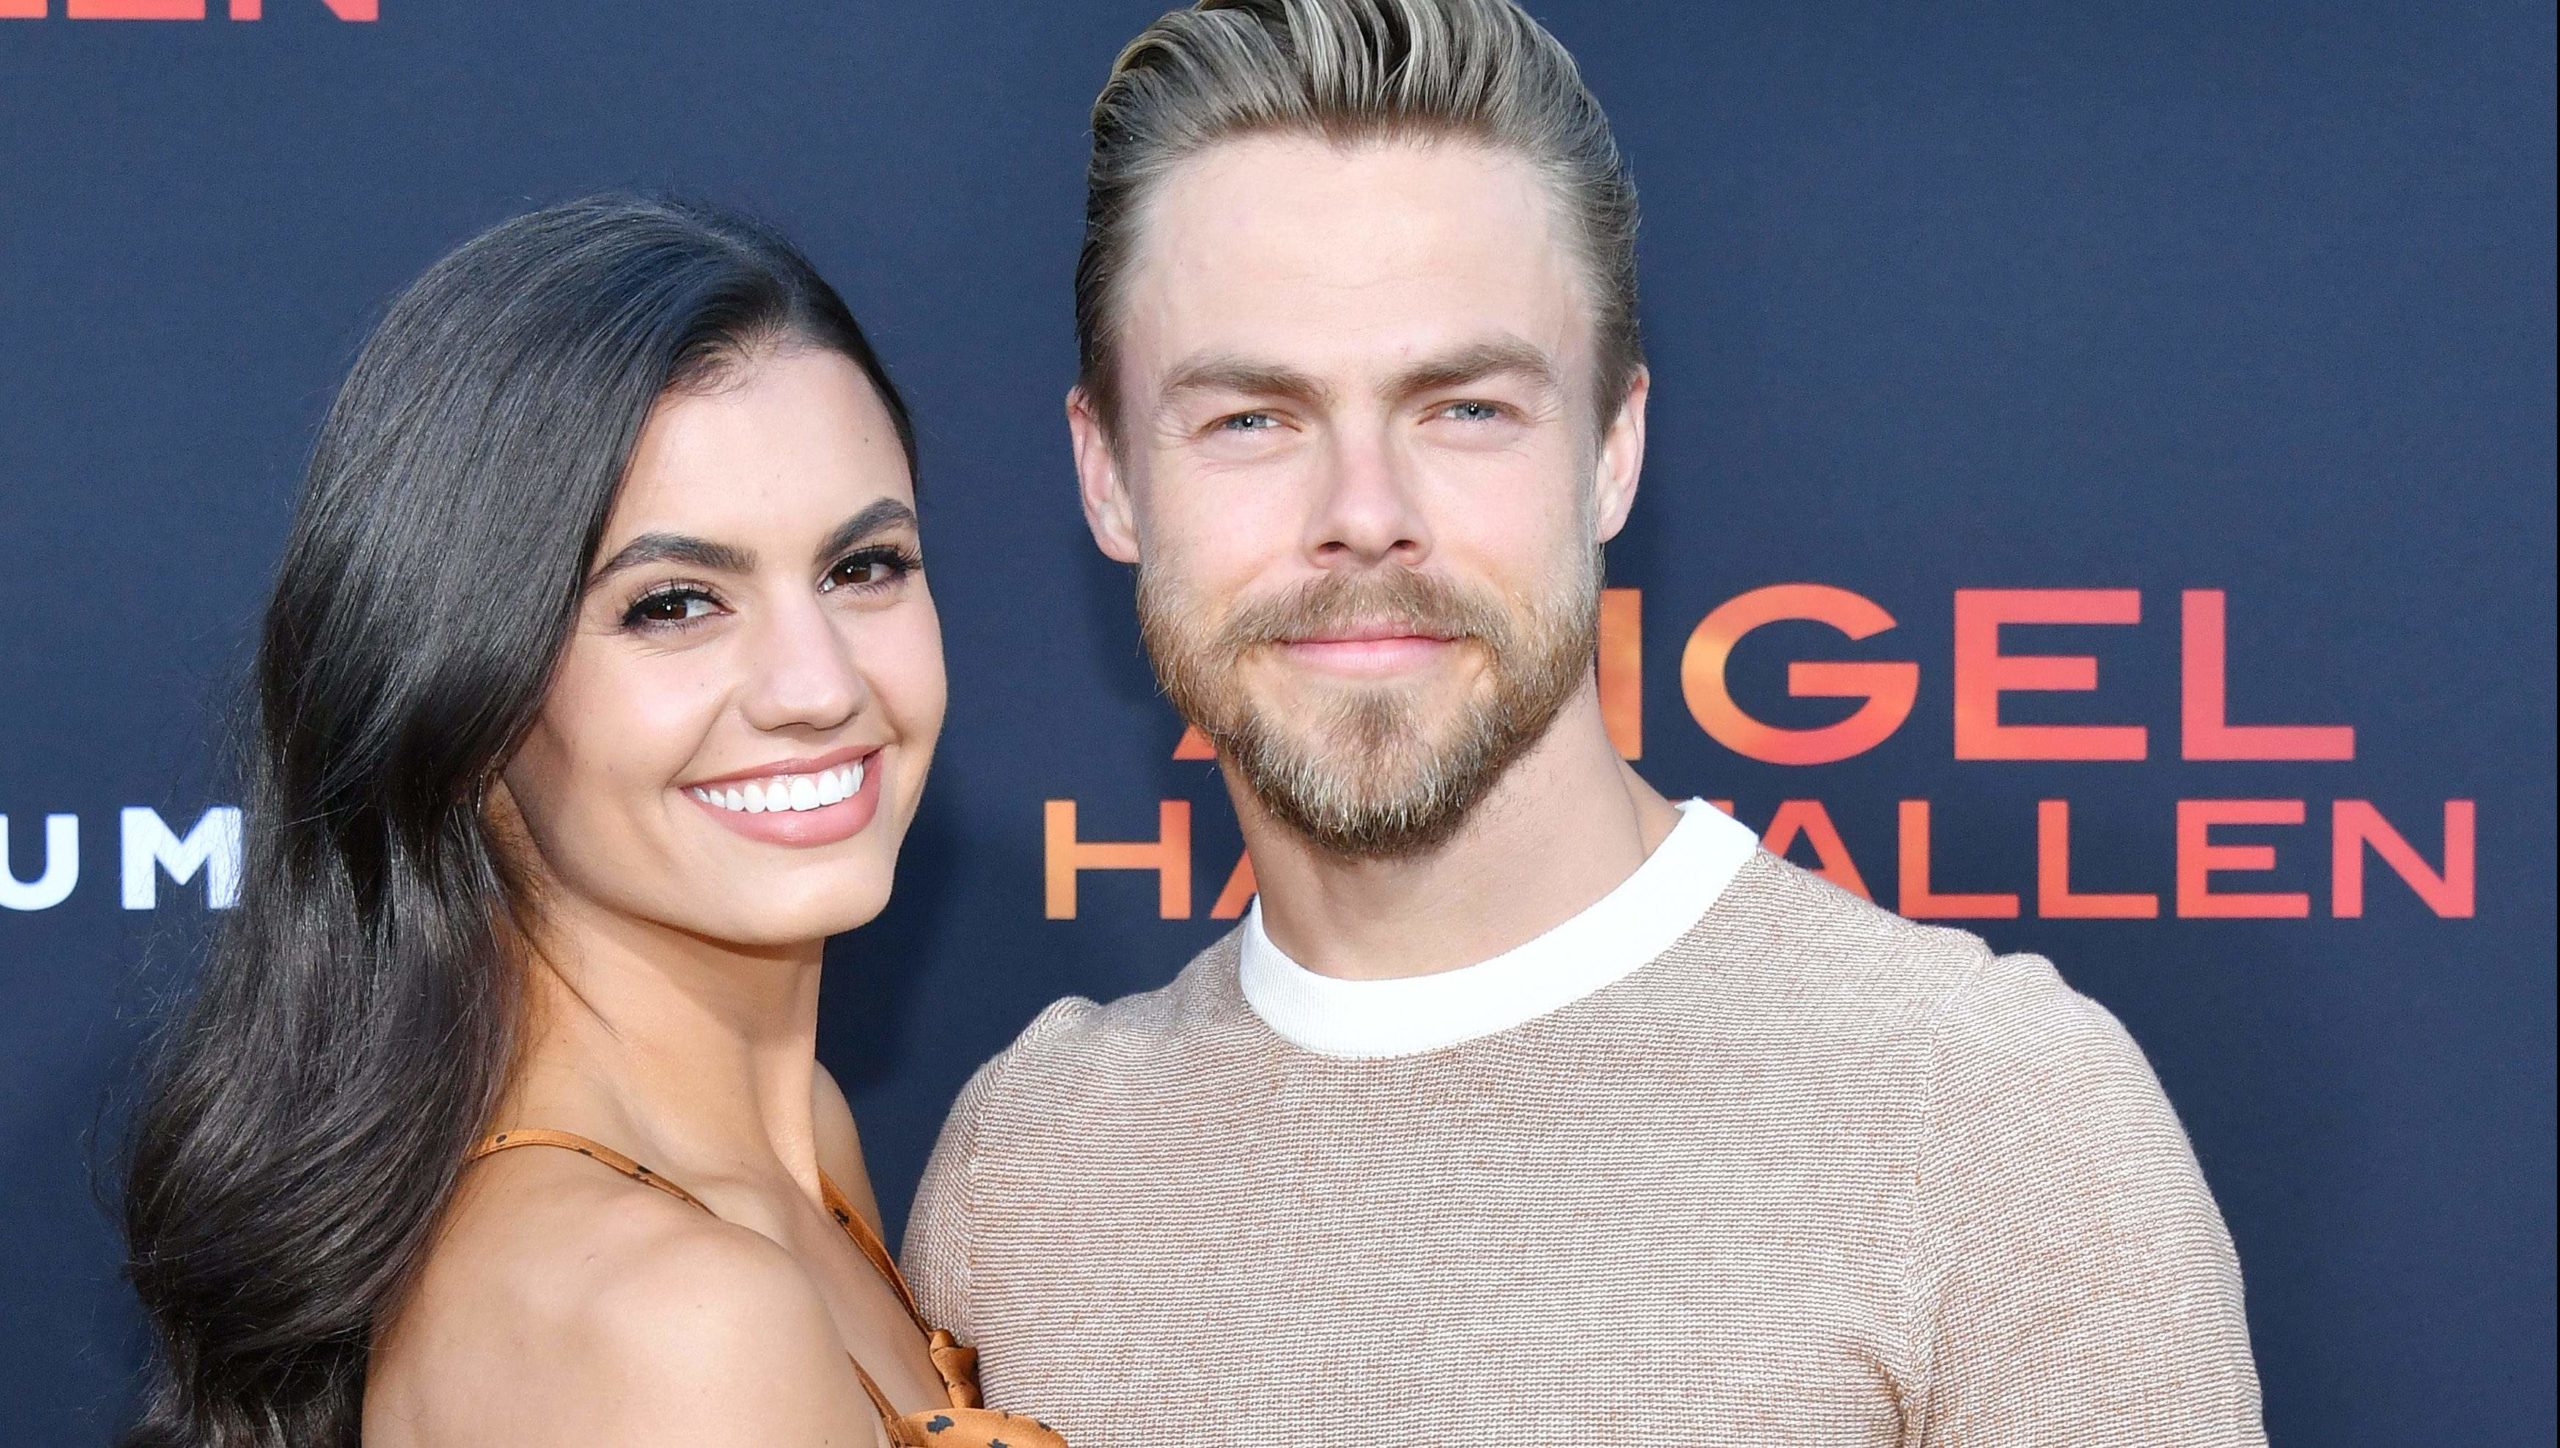 Dancing with The Stars Derek Hough Season 30 Star Confesses About His Early Days with DWTS!